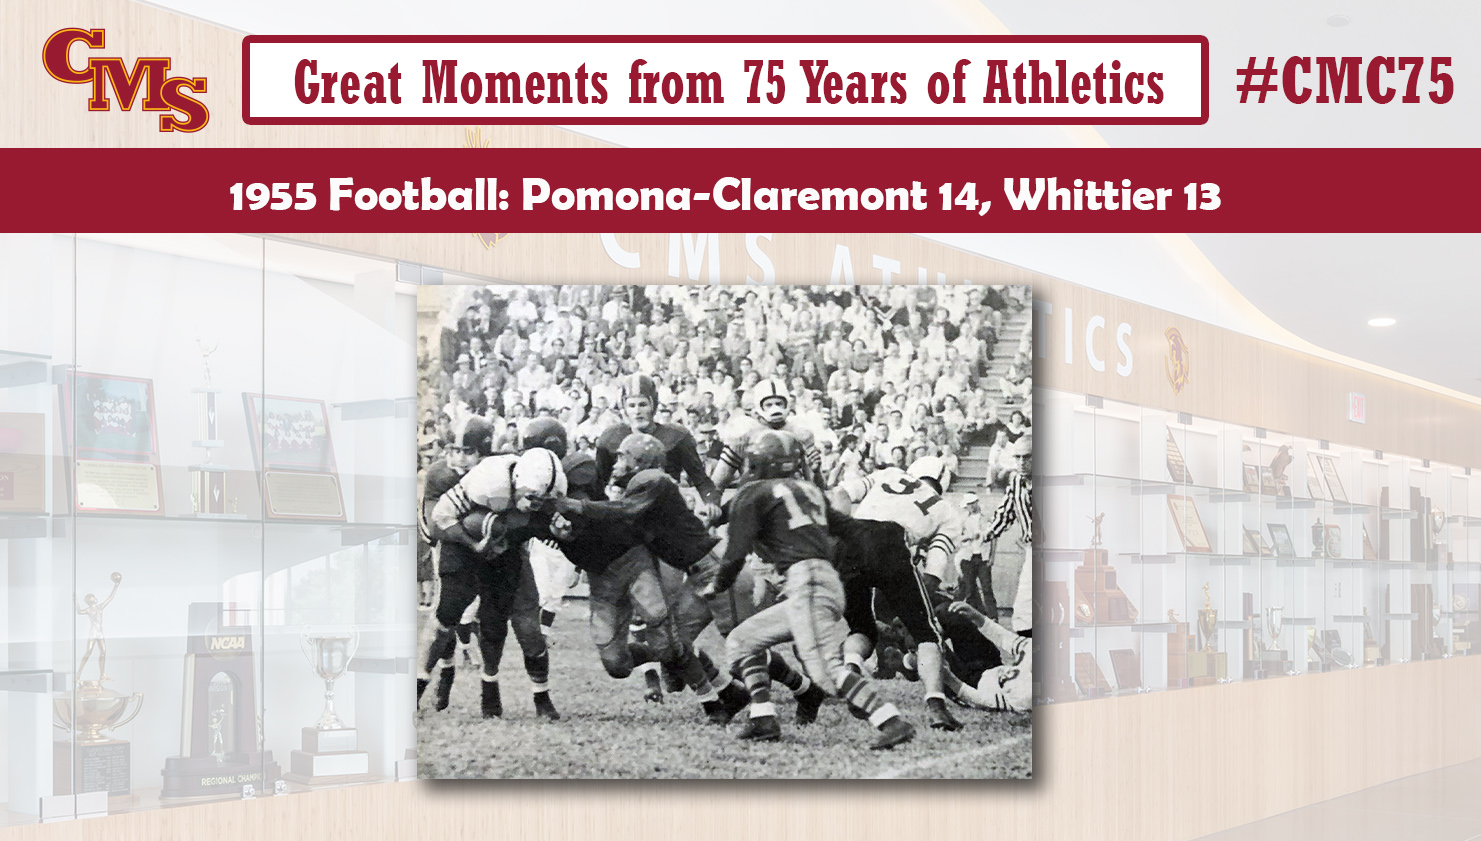 A photo of the 1955 Pomona-Claremont Football team in action. 

Words read: Great Moments in 75 Years of Athletics, 1955 Football: Pomona-Claremont 14, Whittier 13